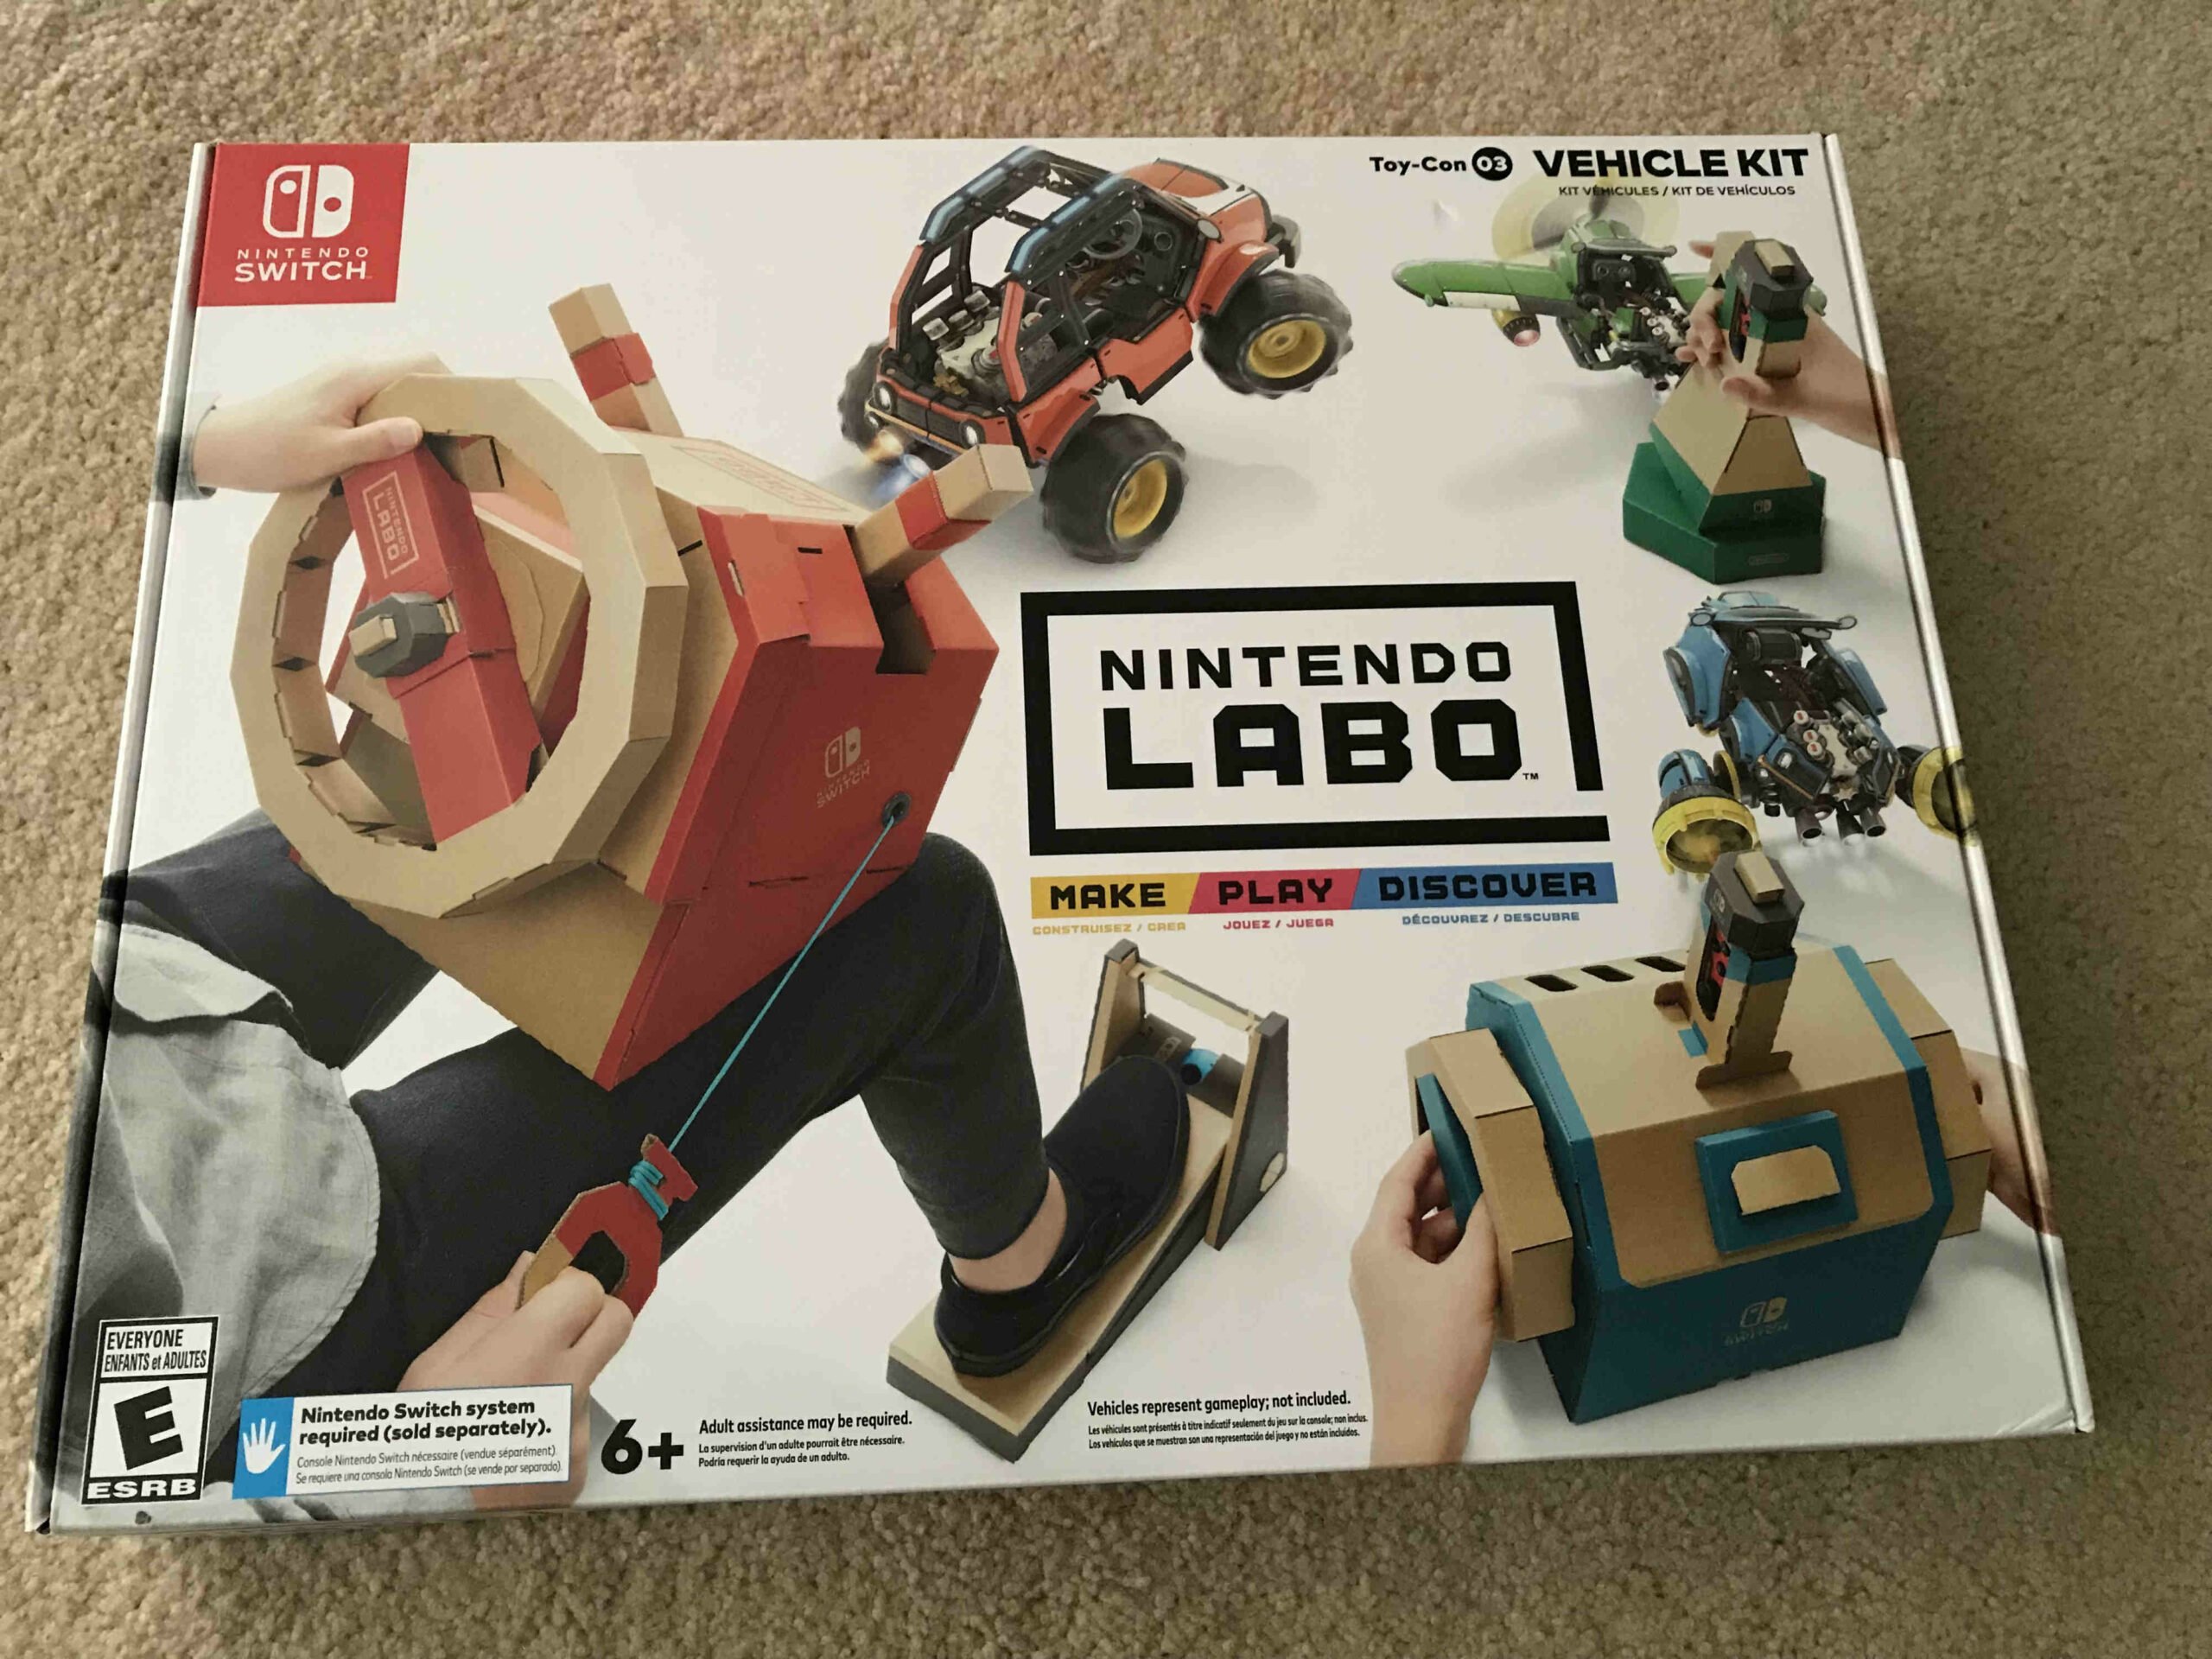 Nintendo's new Labo Vehicle Kit was more fun than I expected - CNET